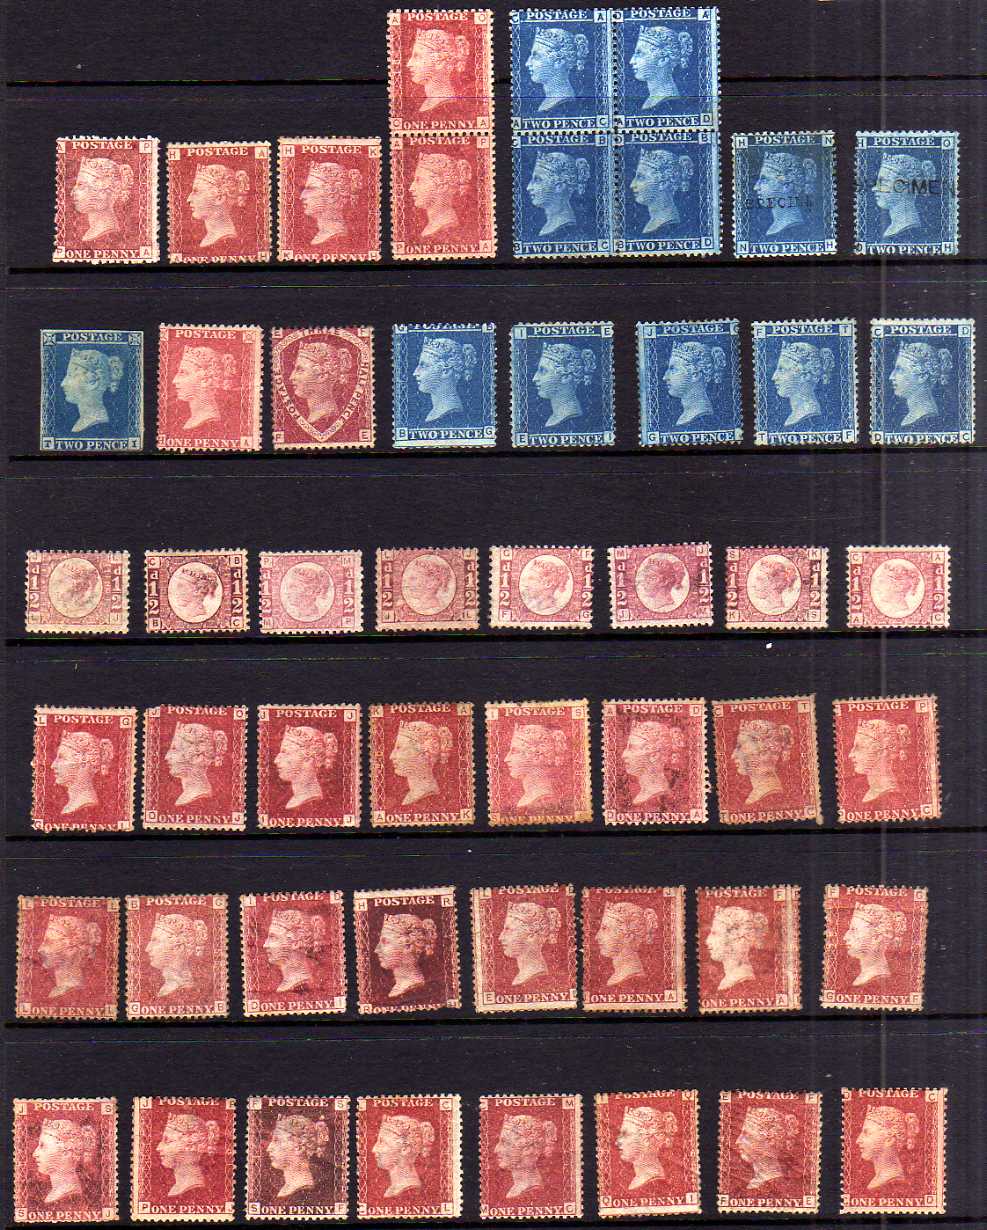 GB: 1841-79 LINE ENGRAVED UNUSED OR OG SELECTION FROM 1841 2d (DEFECTIVE), 1d PLATES (29),